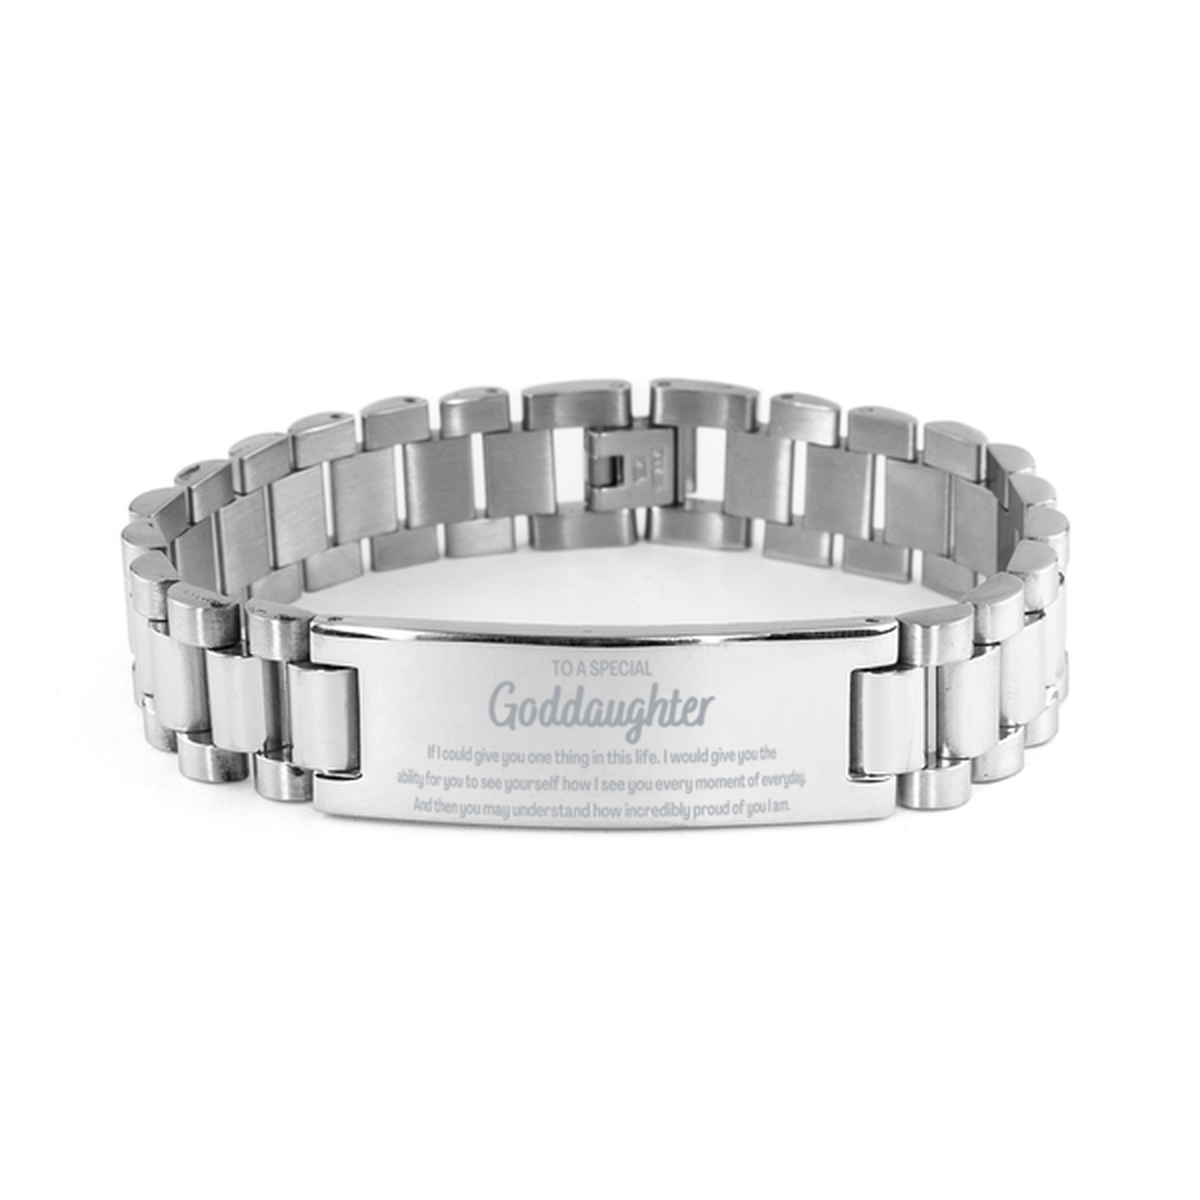 To My Goddaughter Ladder Stainless Steel Bracelet, Gifts For Goddaughter Engraved, Inspirational Gifts for Christmas Birthday, Epic Gifts for Goddaughter To A Special Goddaughter how incredibly proud of you I am